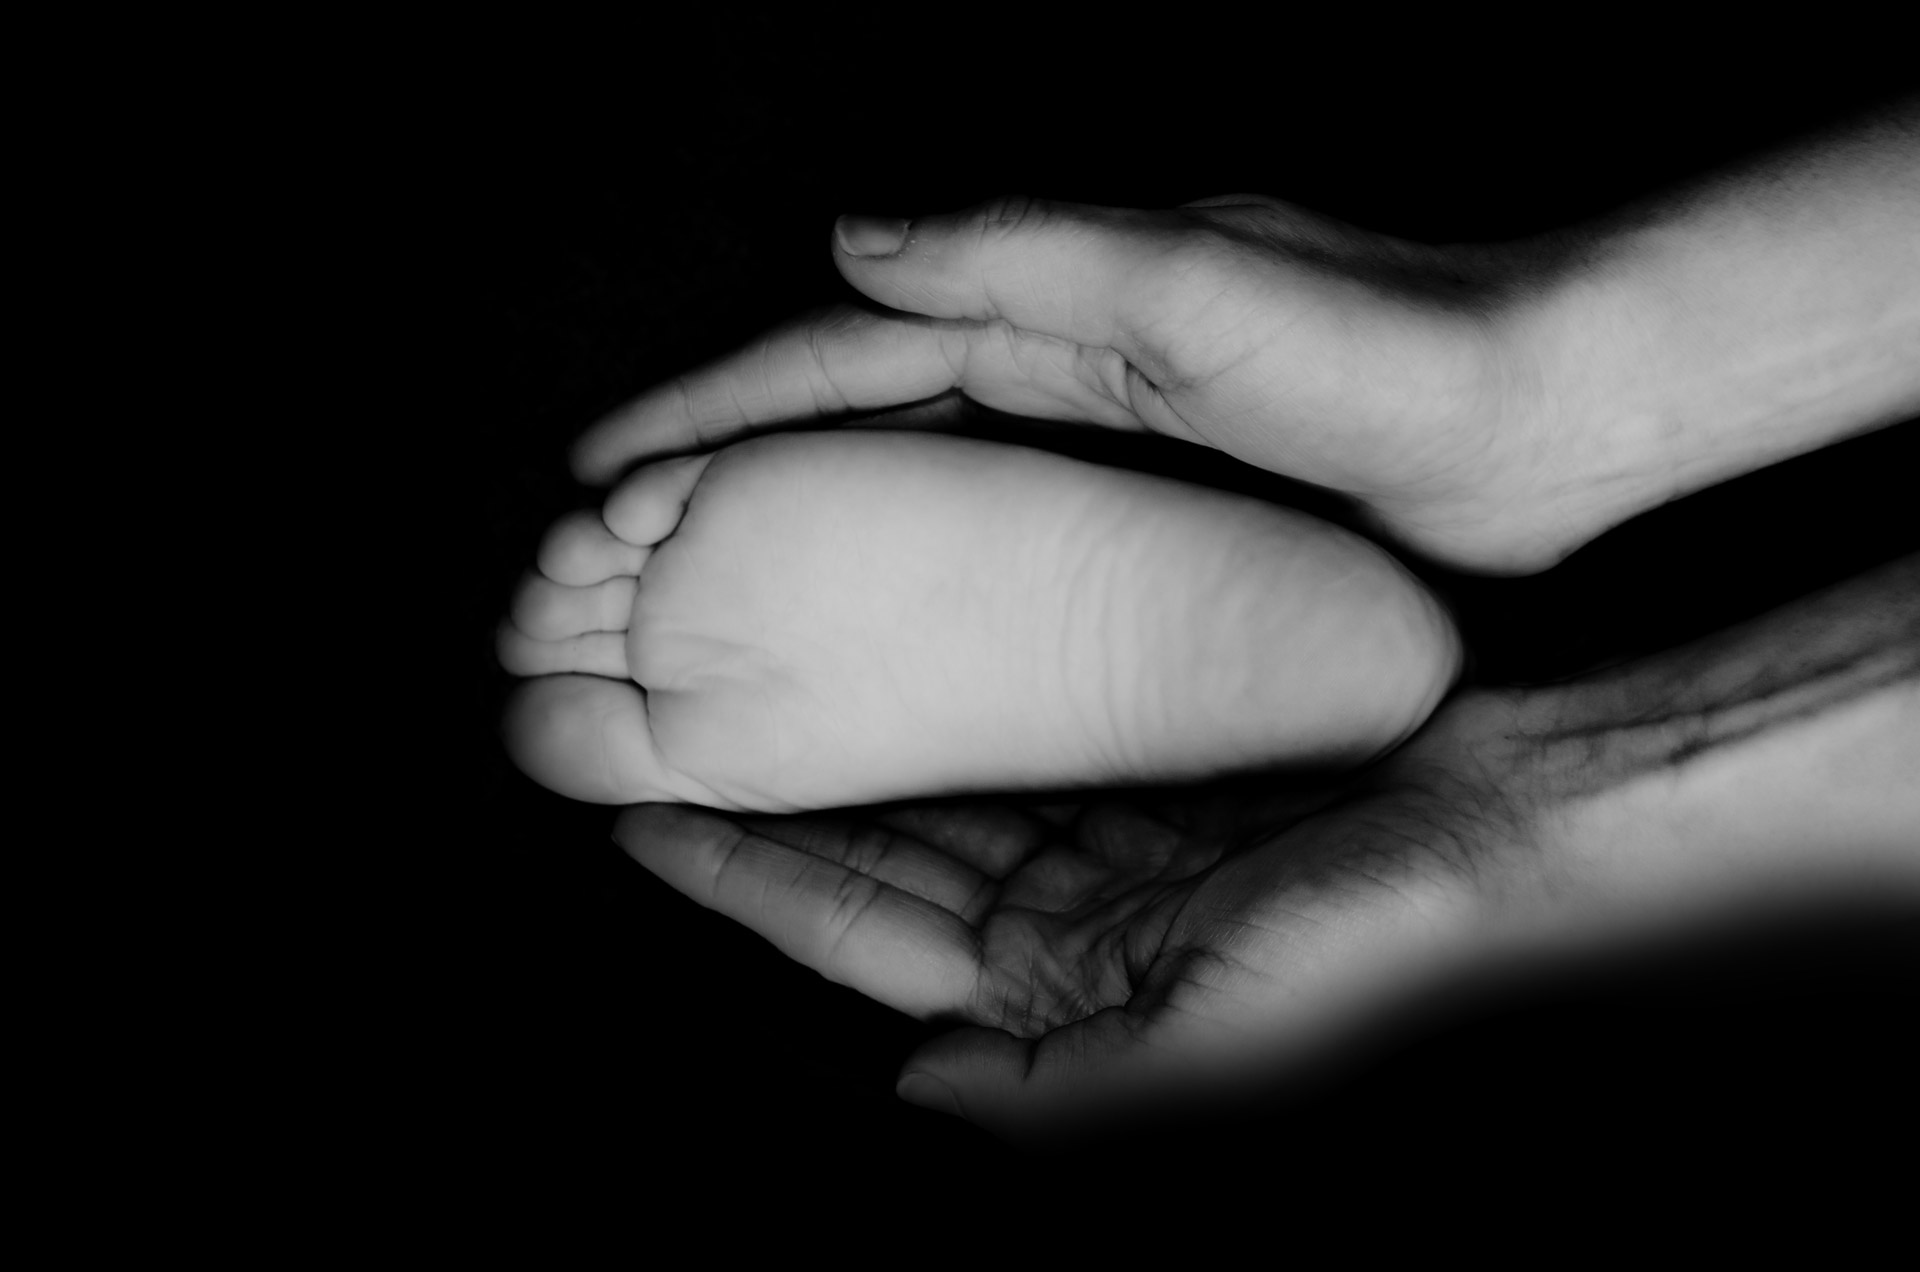 Child's Foot In The Palms